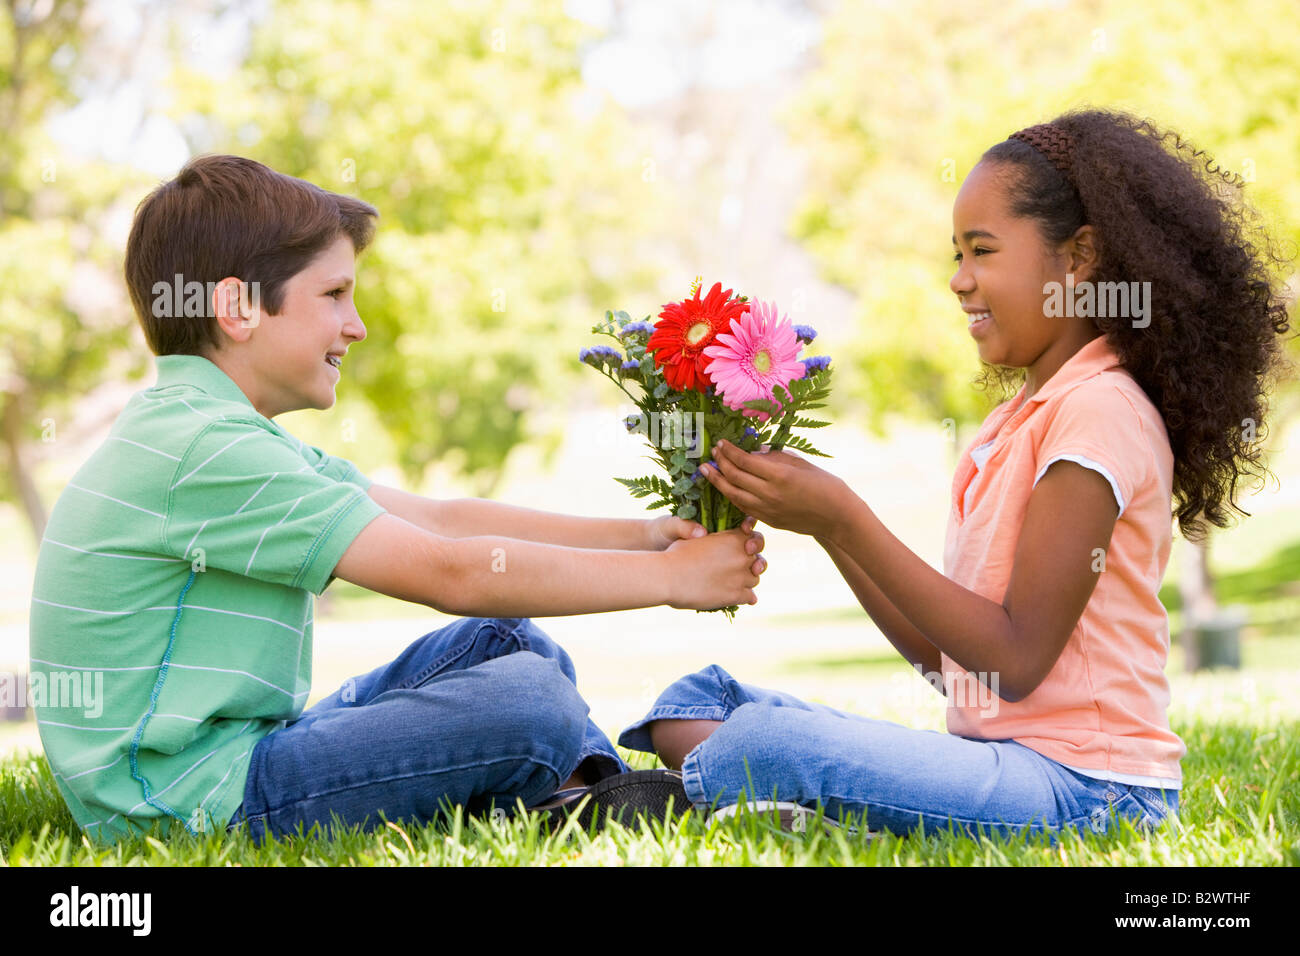 Young boy giving young girl flowers and smiling Stock Photo - Alamy